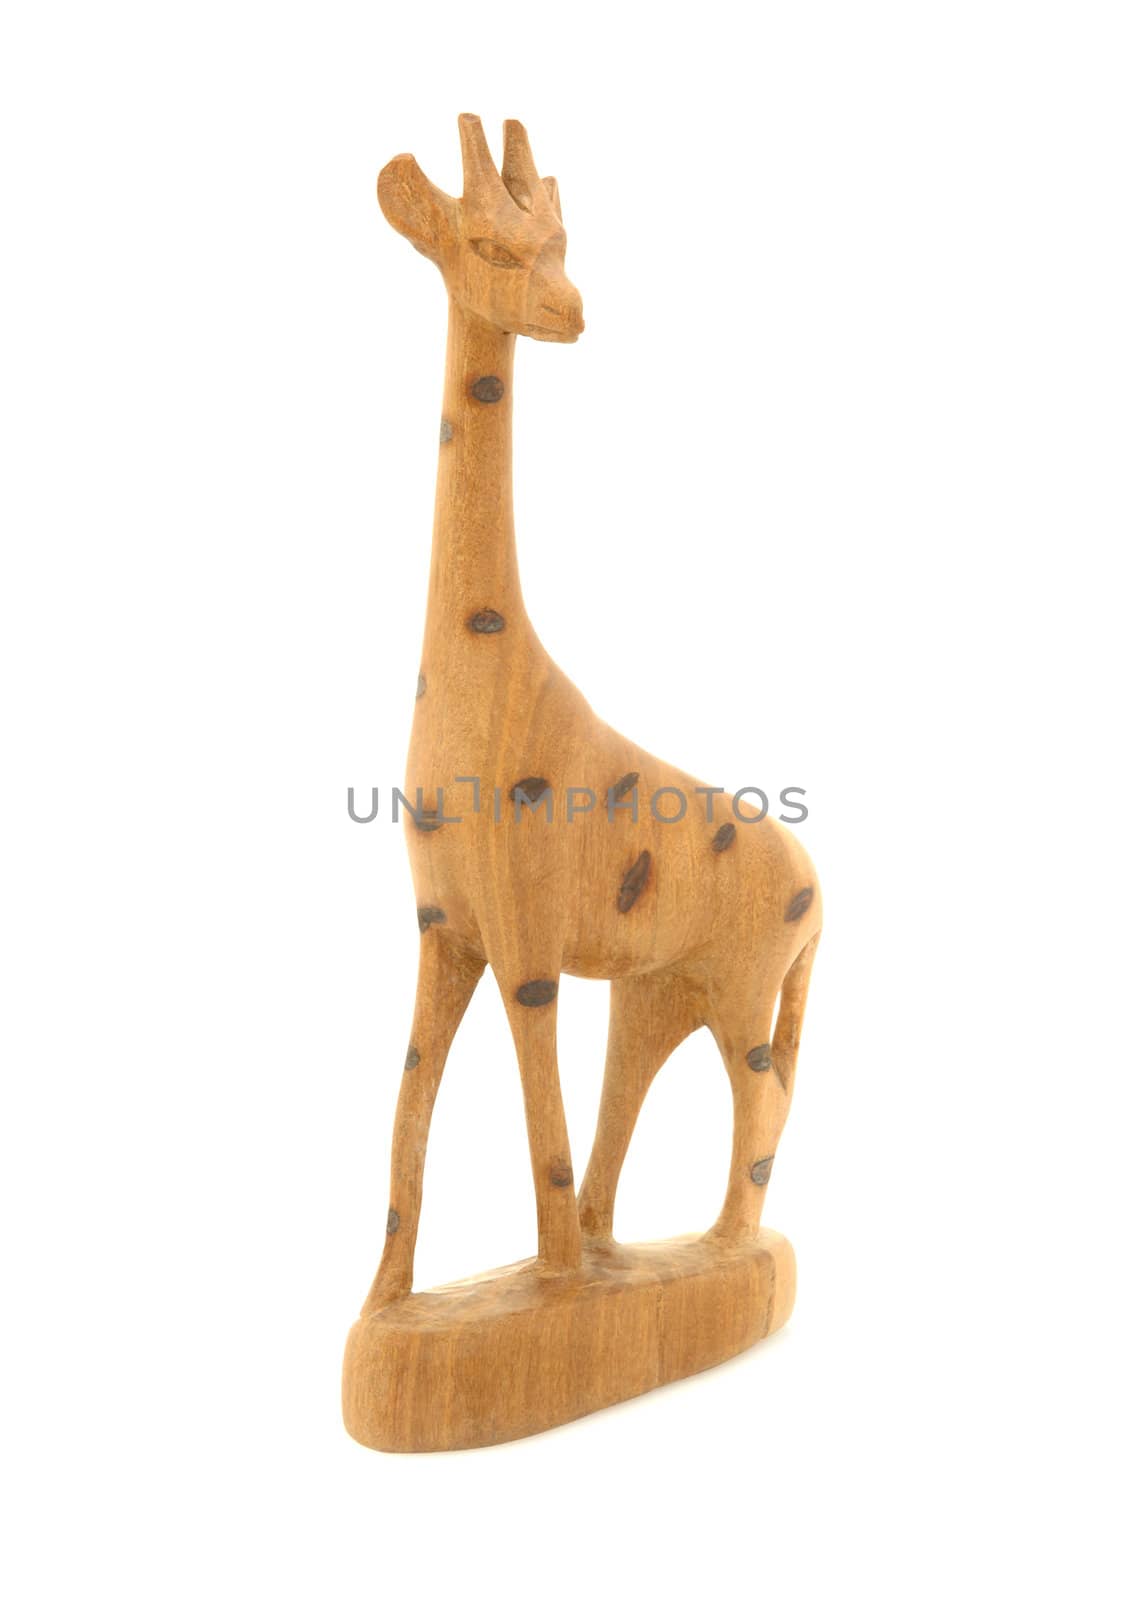 Antique Wooden Statue of a Giraffe by griffre